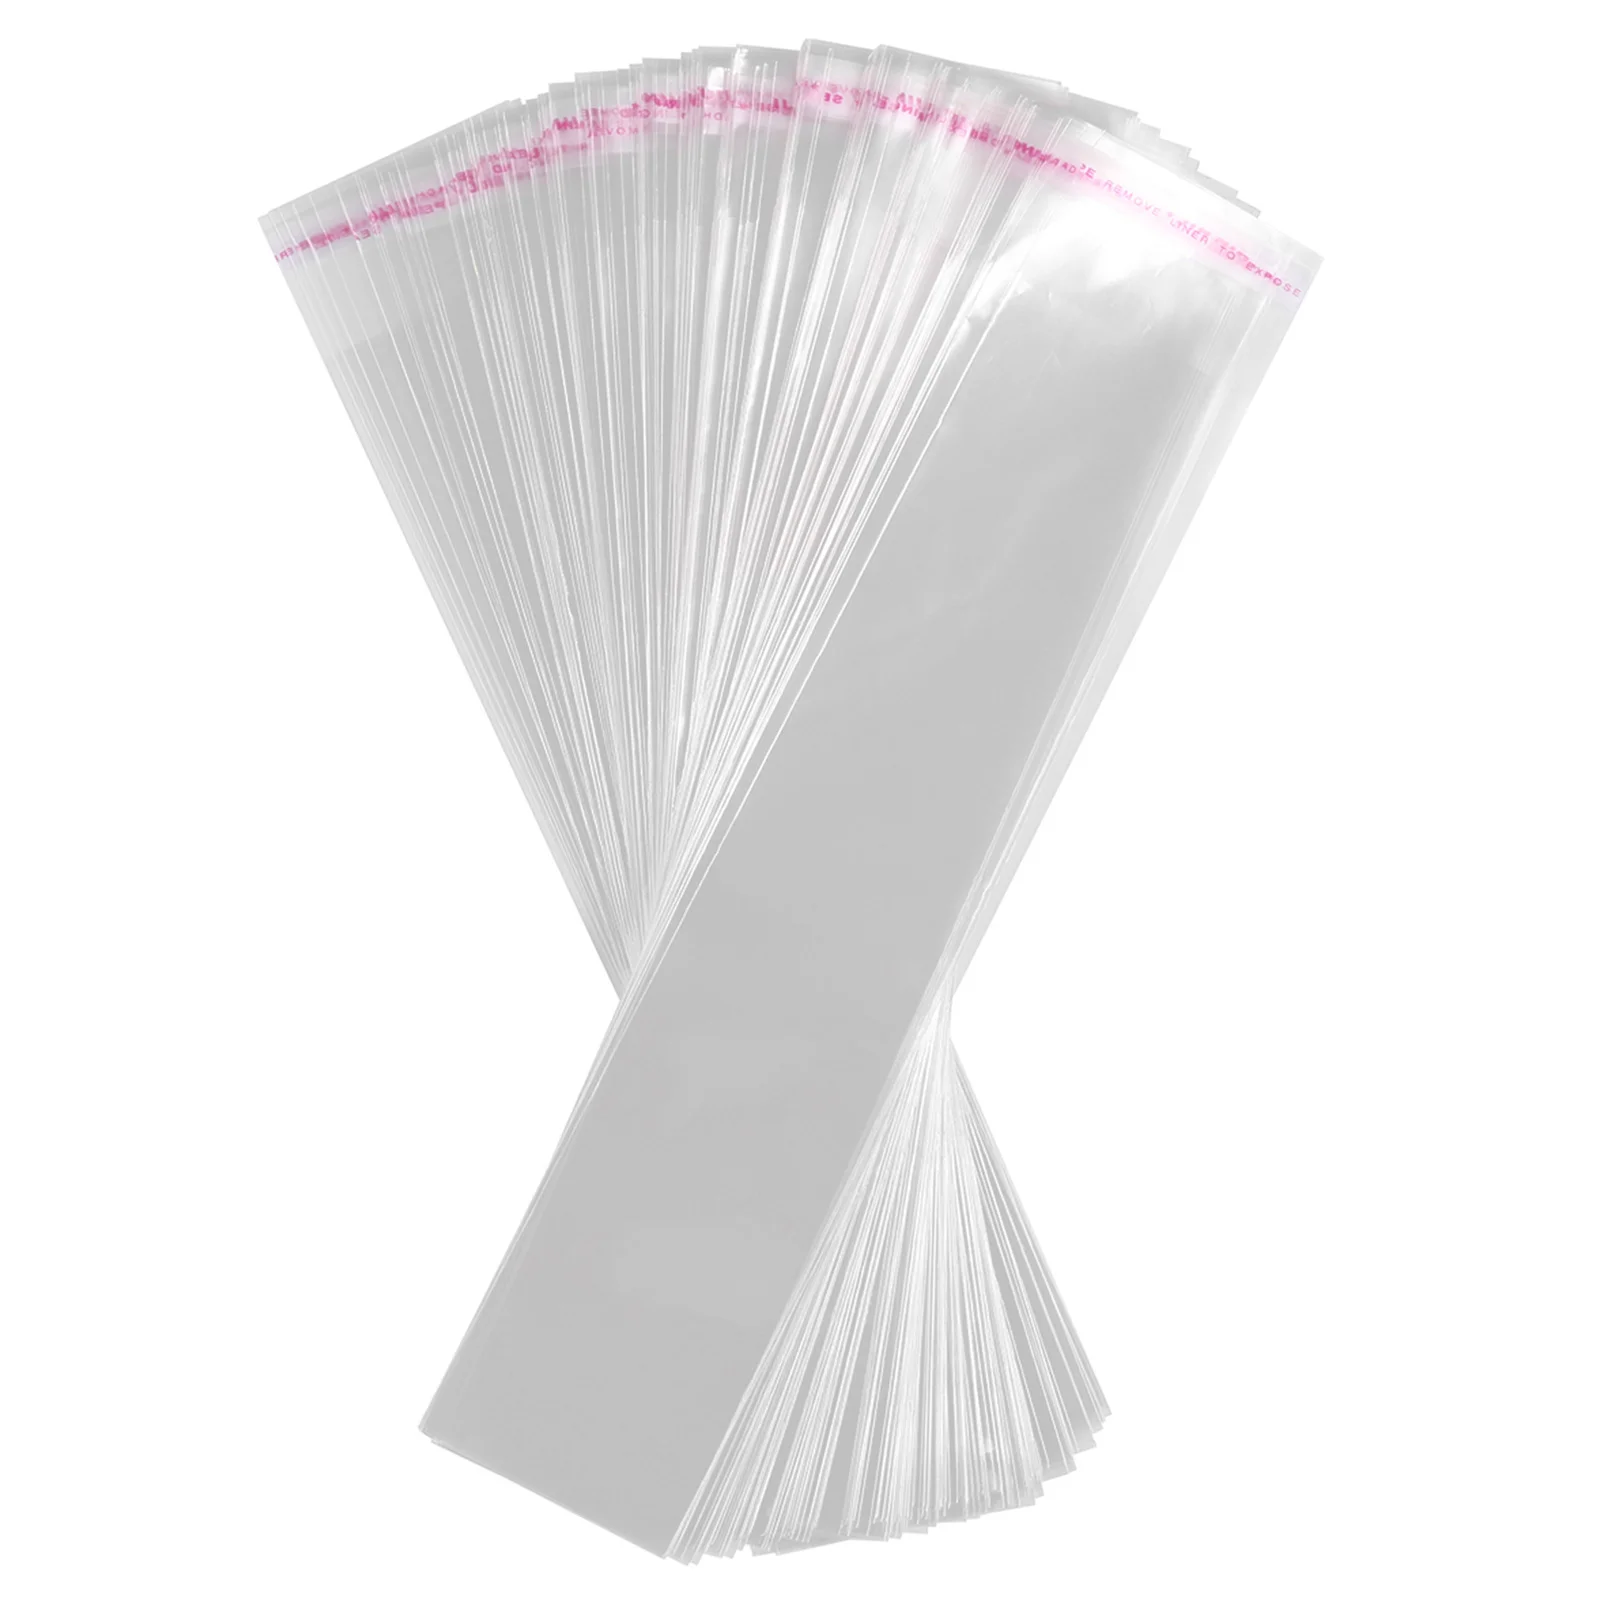 

Cello Cellophane Clear Bakery Candy Self Gift Adhensive Sealing Cookie Treat Adhesive Plastic Pretzel Pouch Resealable Packaging